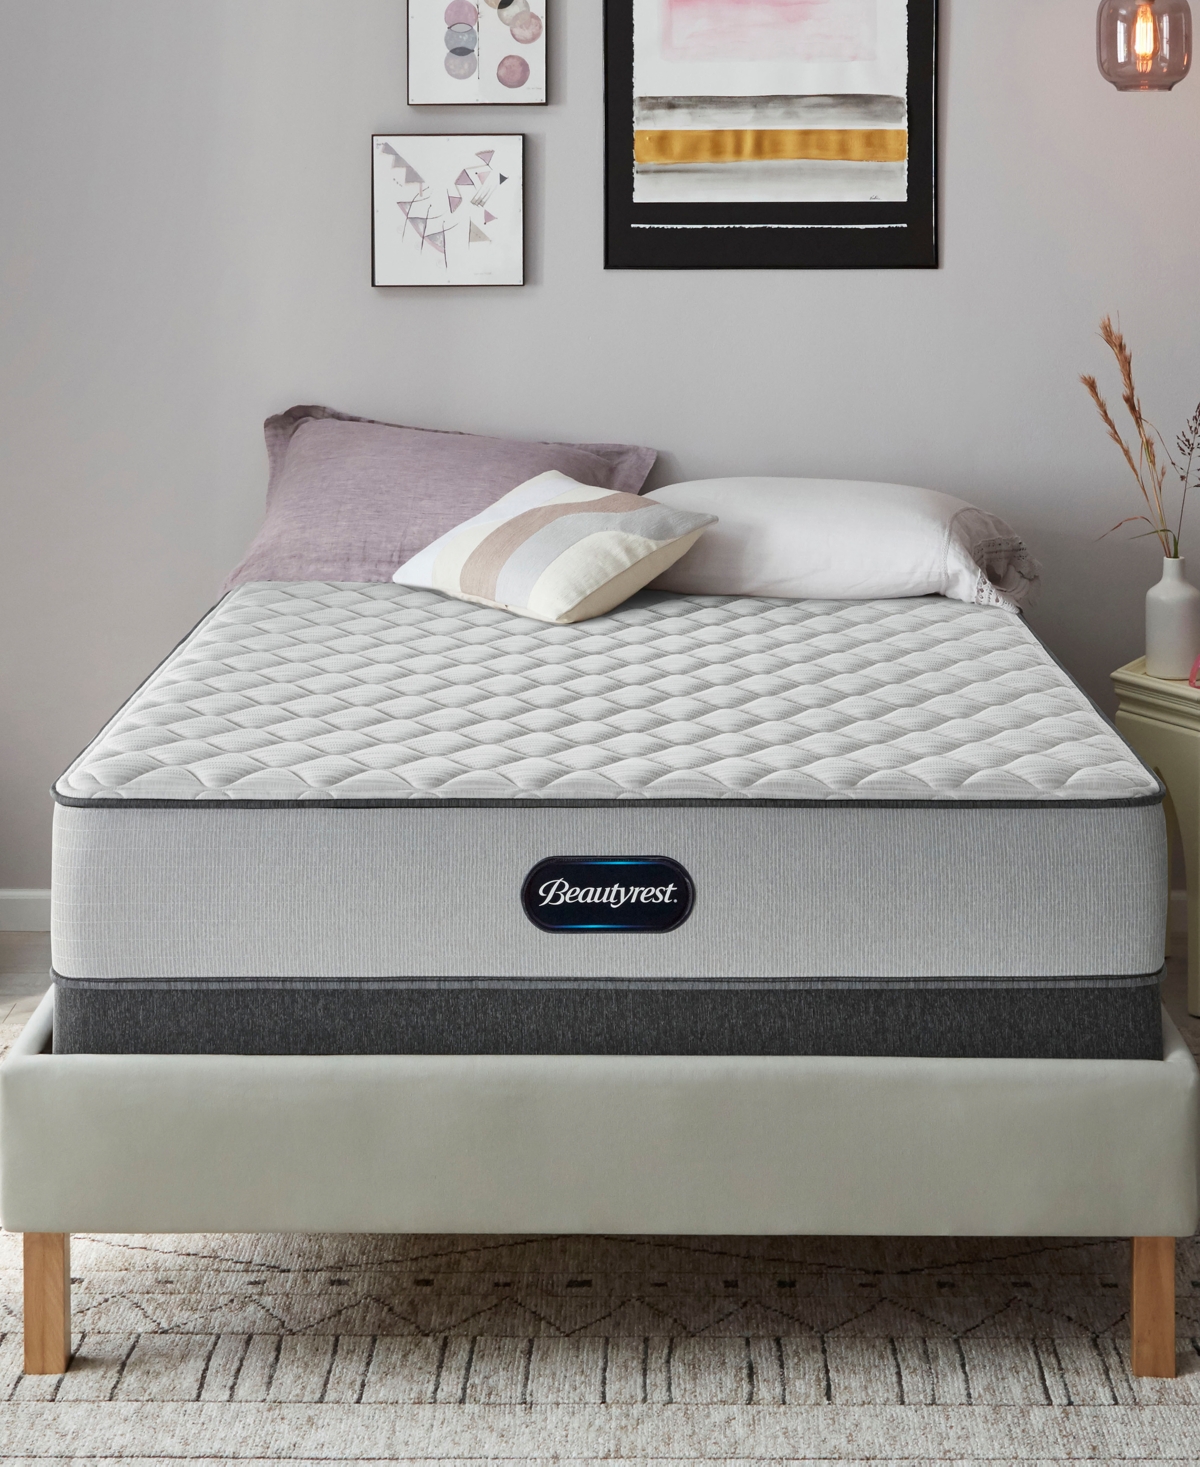 Beautyrest Br800 11.25" Firm Mattress In No Color